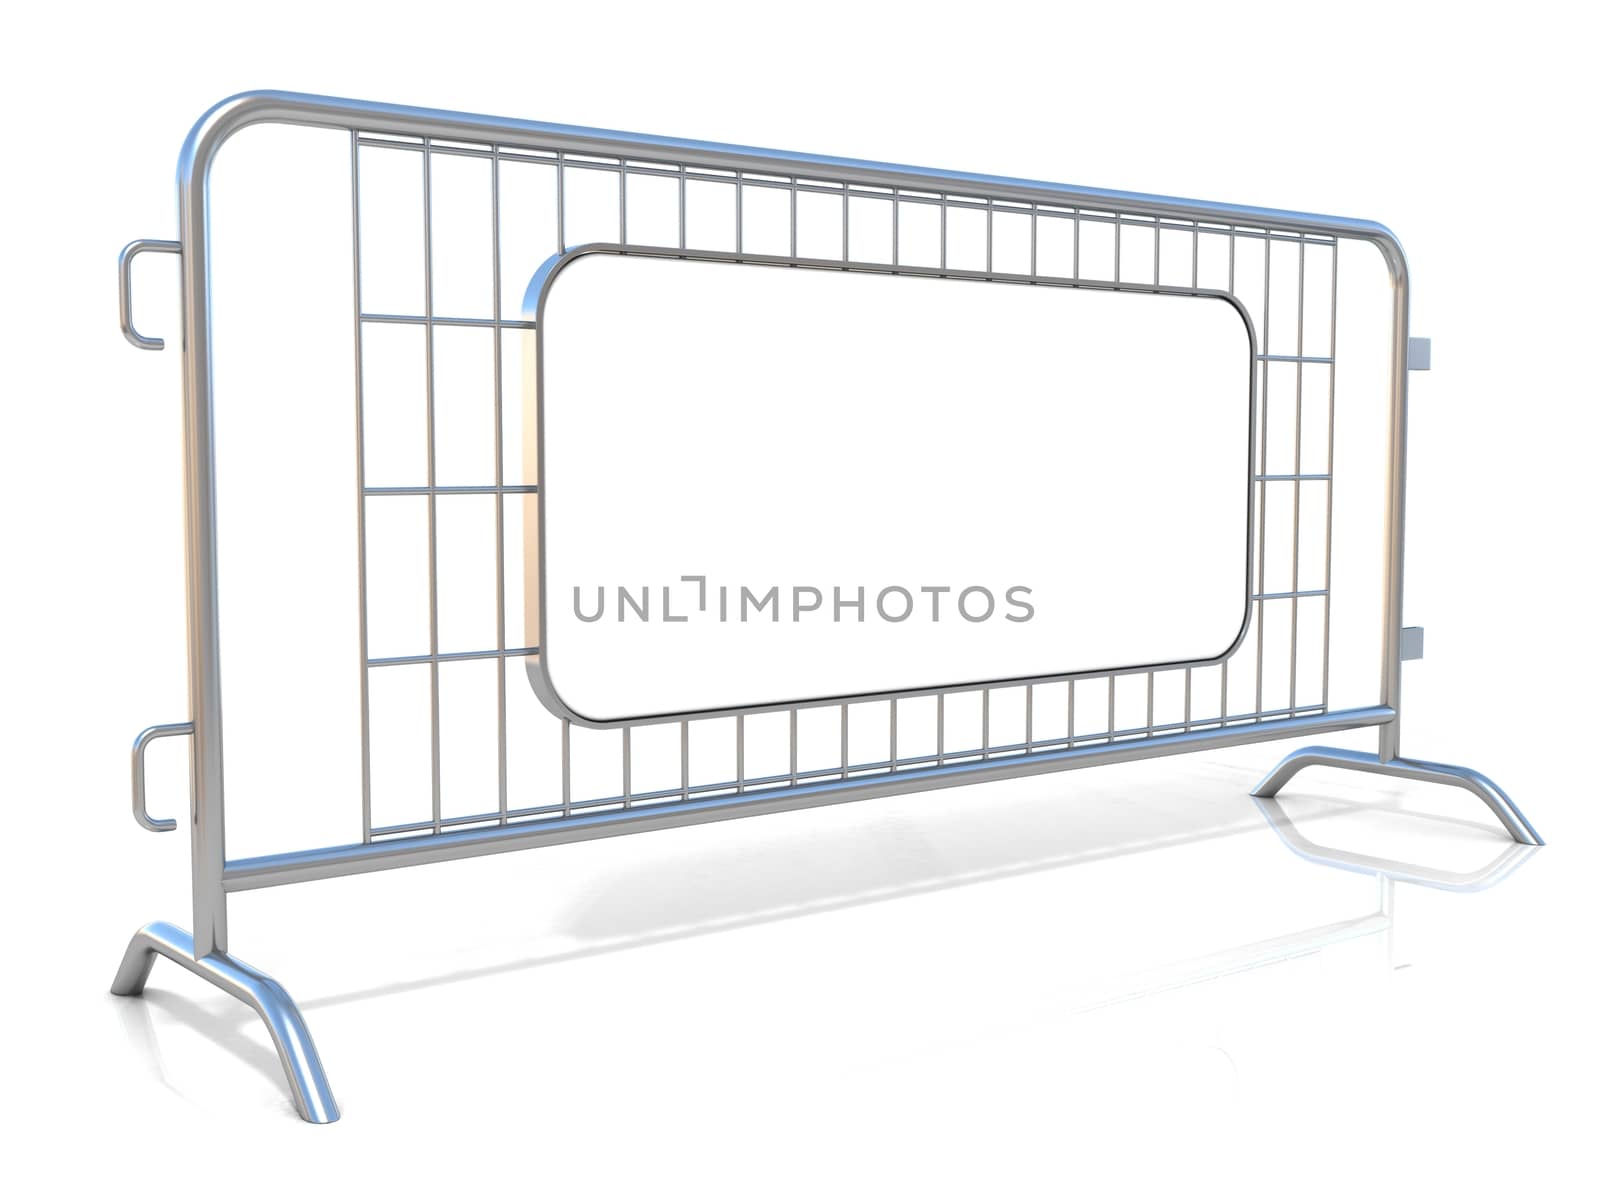 Steel barricades, isolated on white background. Side view, with sign board